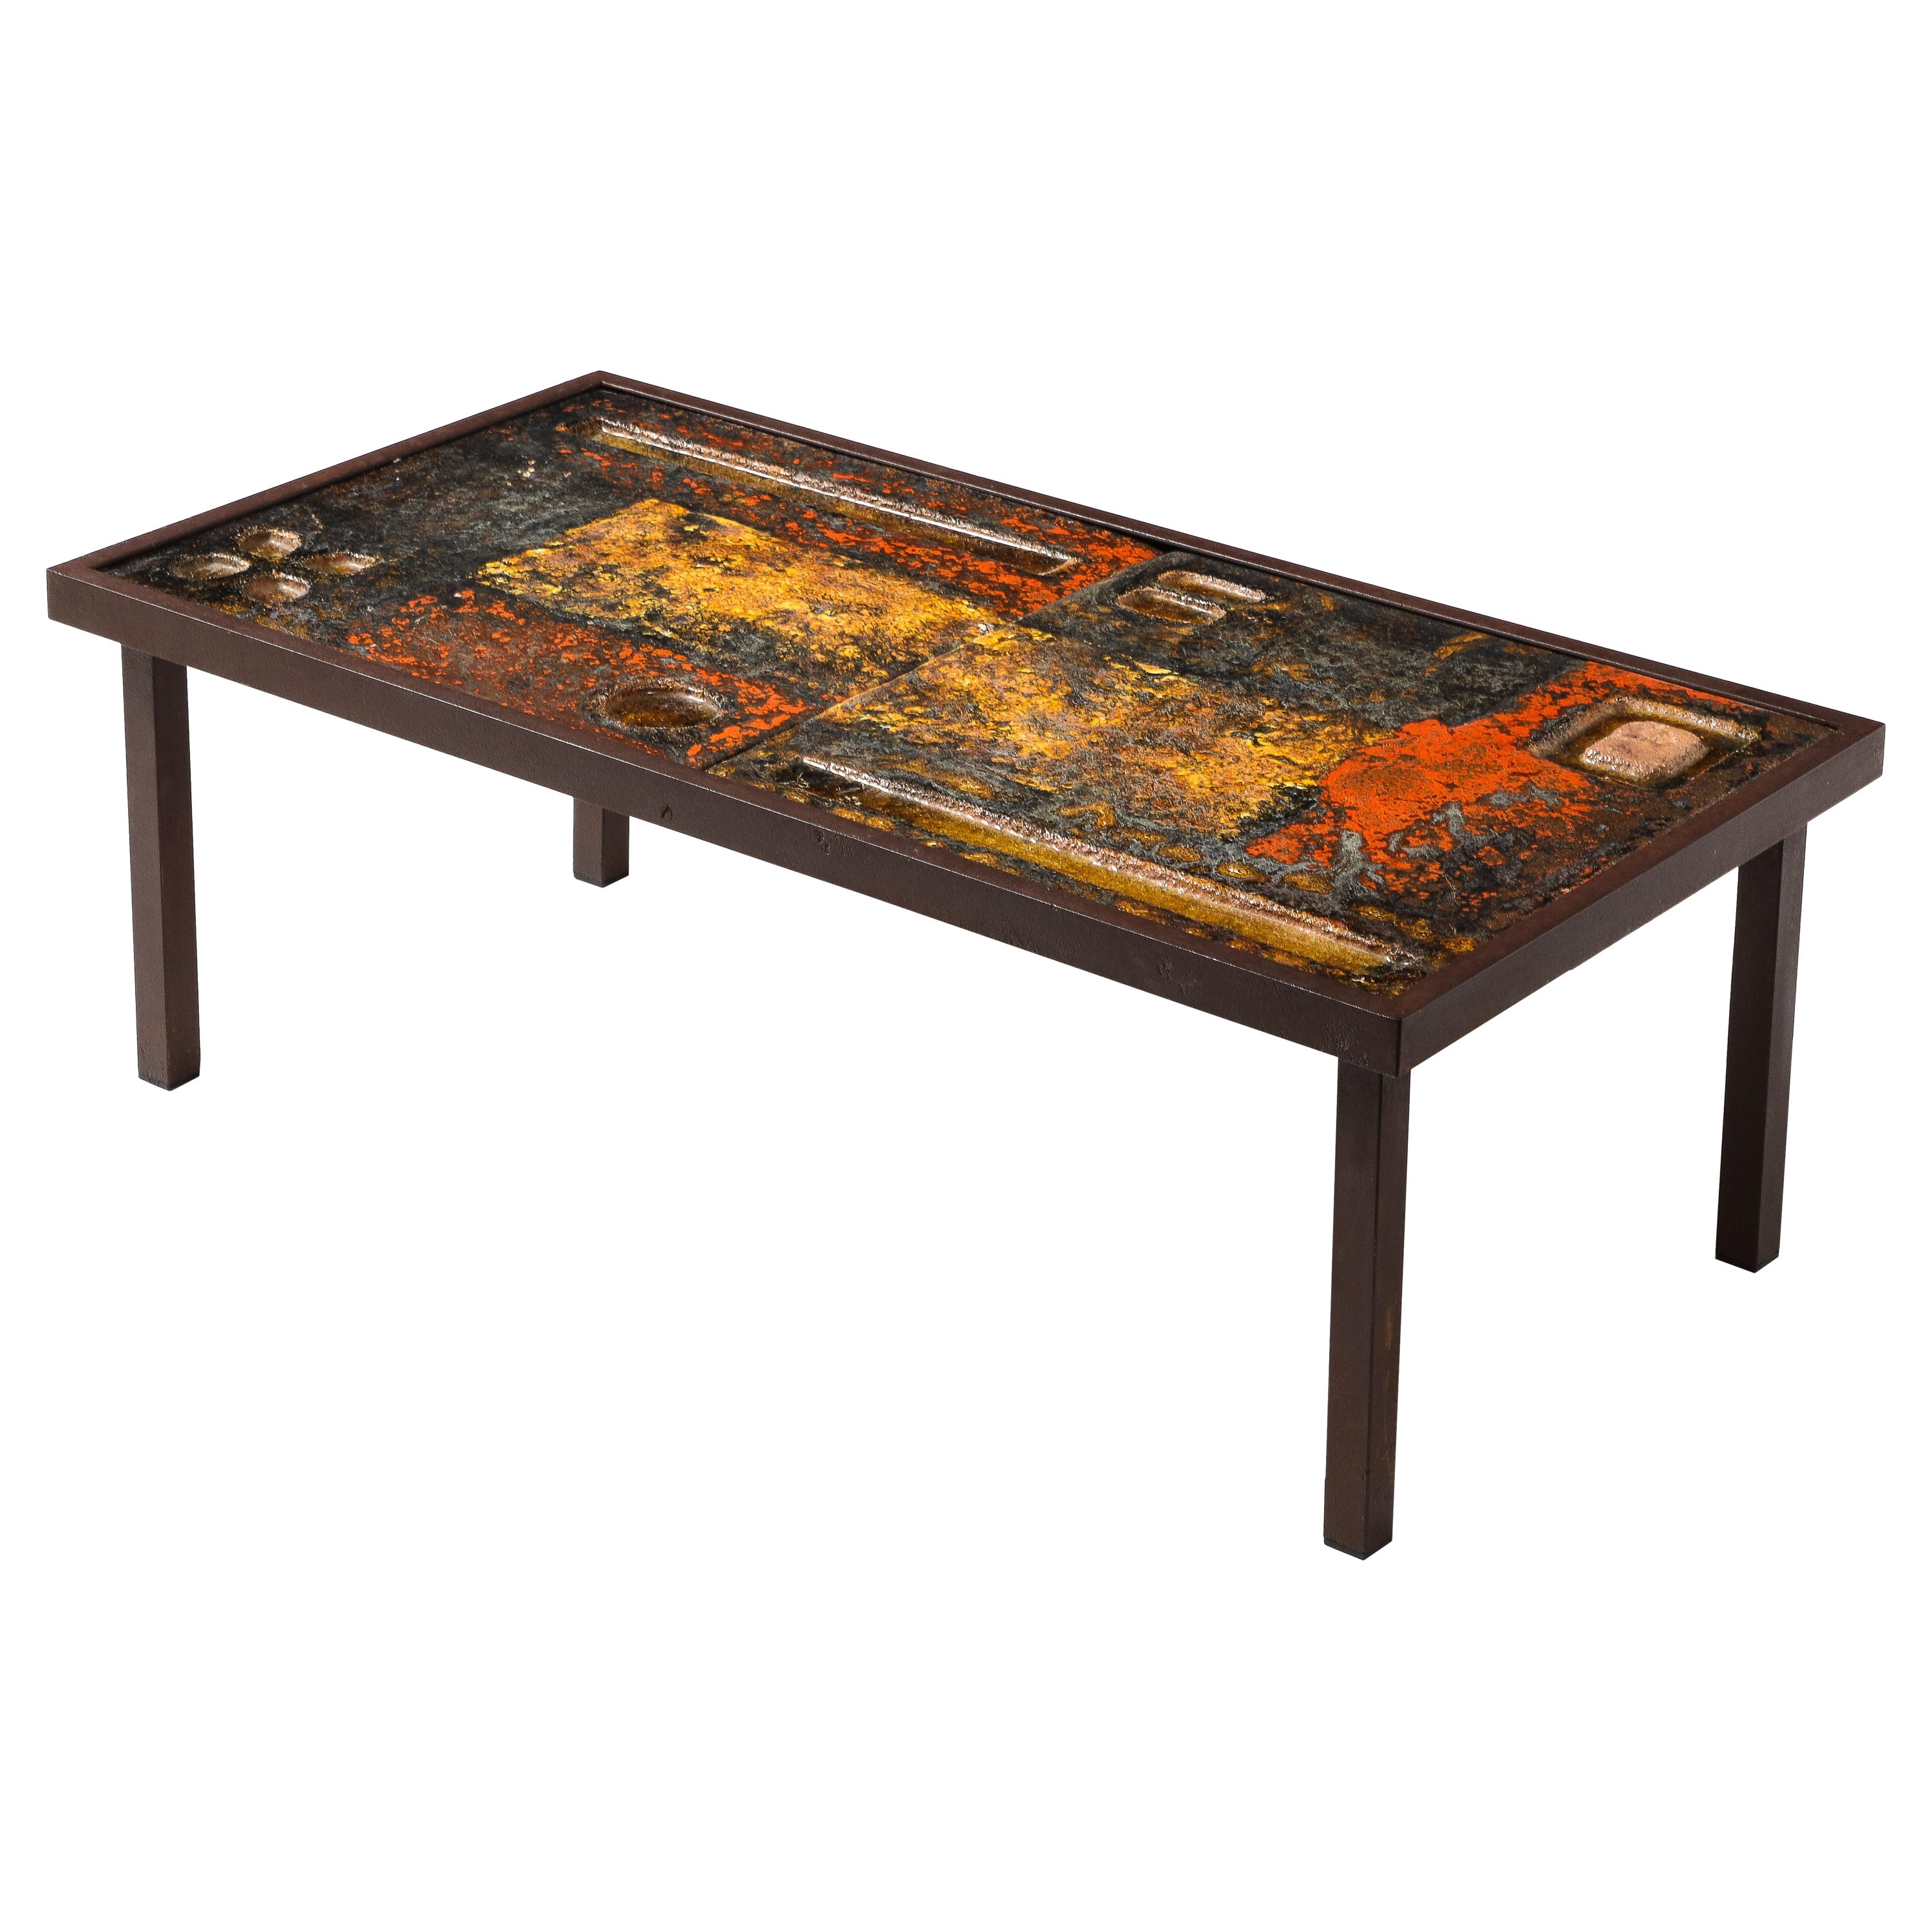 Cloutiers Freres Lava Tiles Coffee Table, France 1960s For Sale